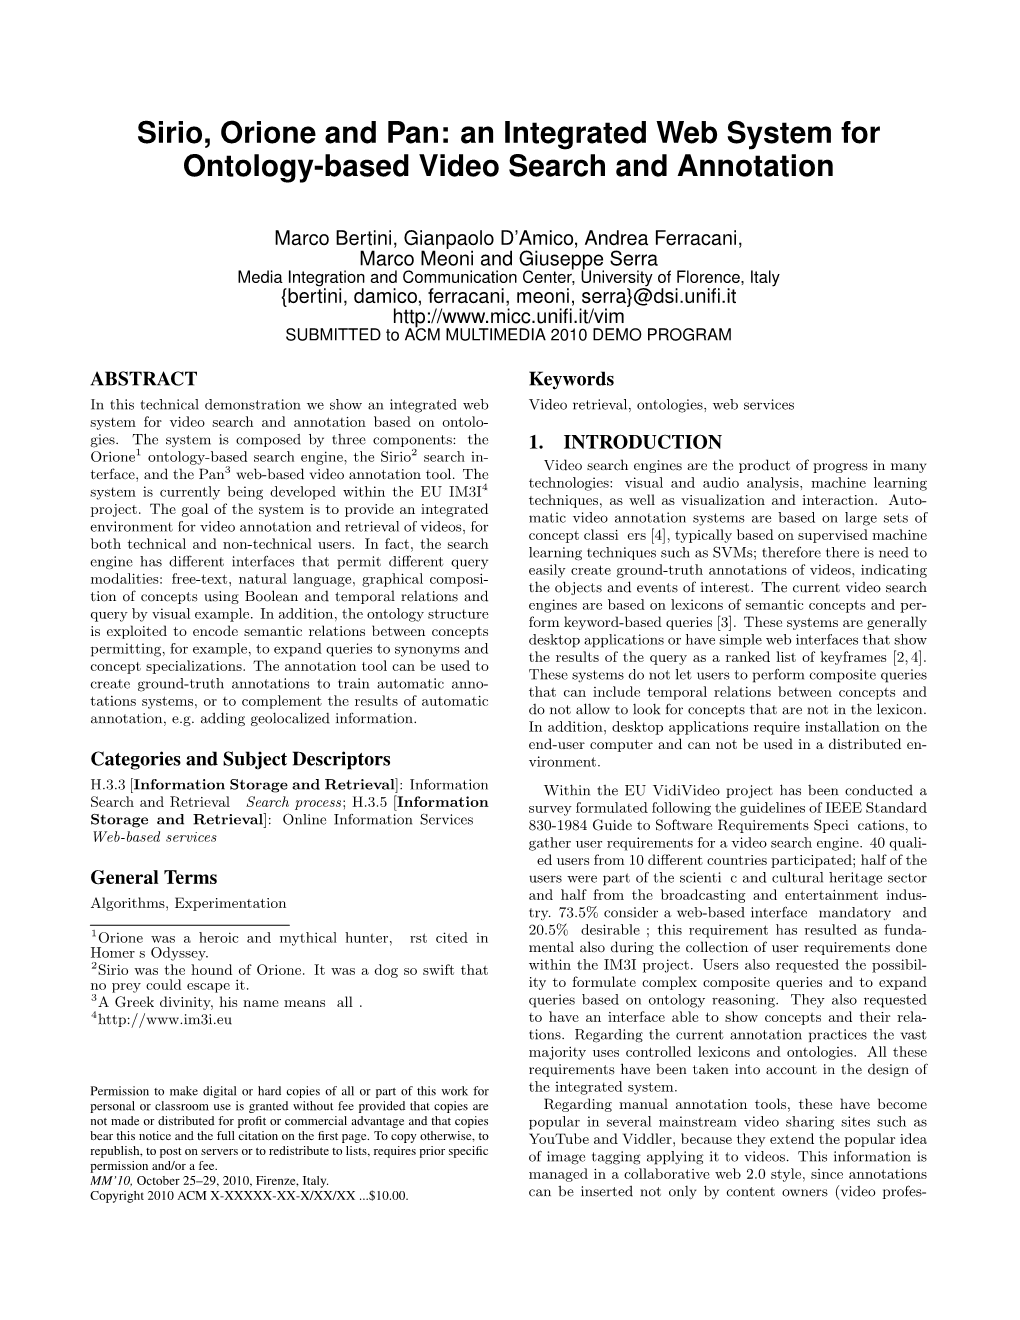 Sirio, Orione and Pan: an Integrated Web System for Ontology-Based Video Search and Annotation